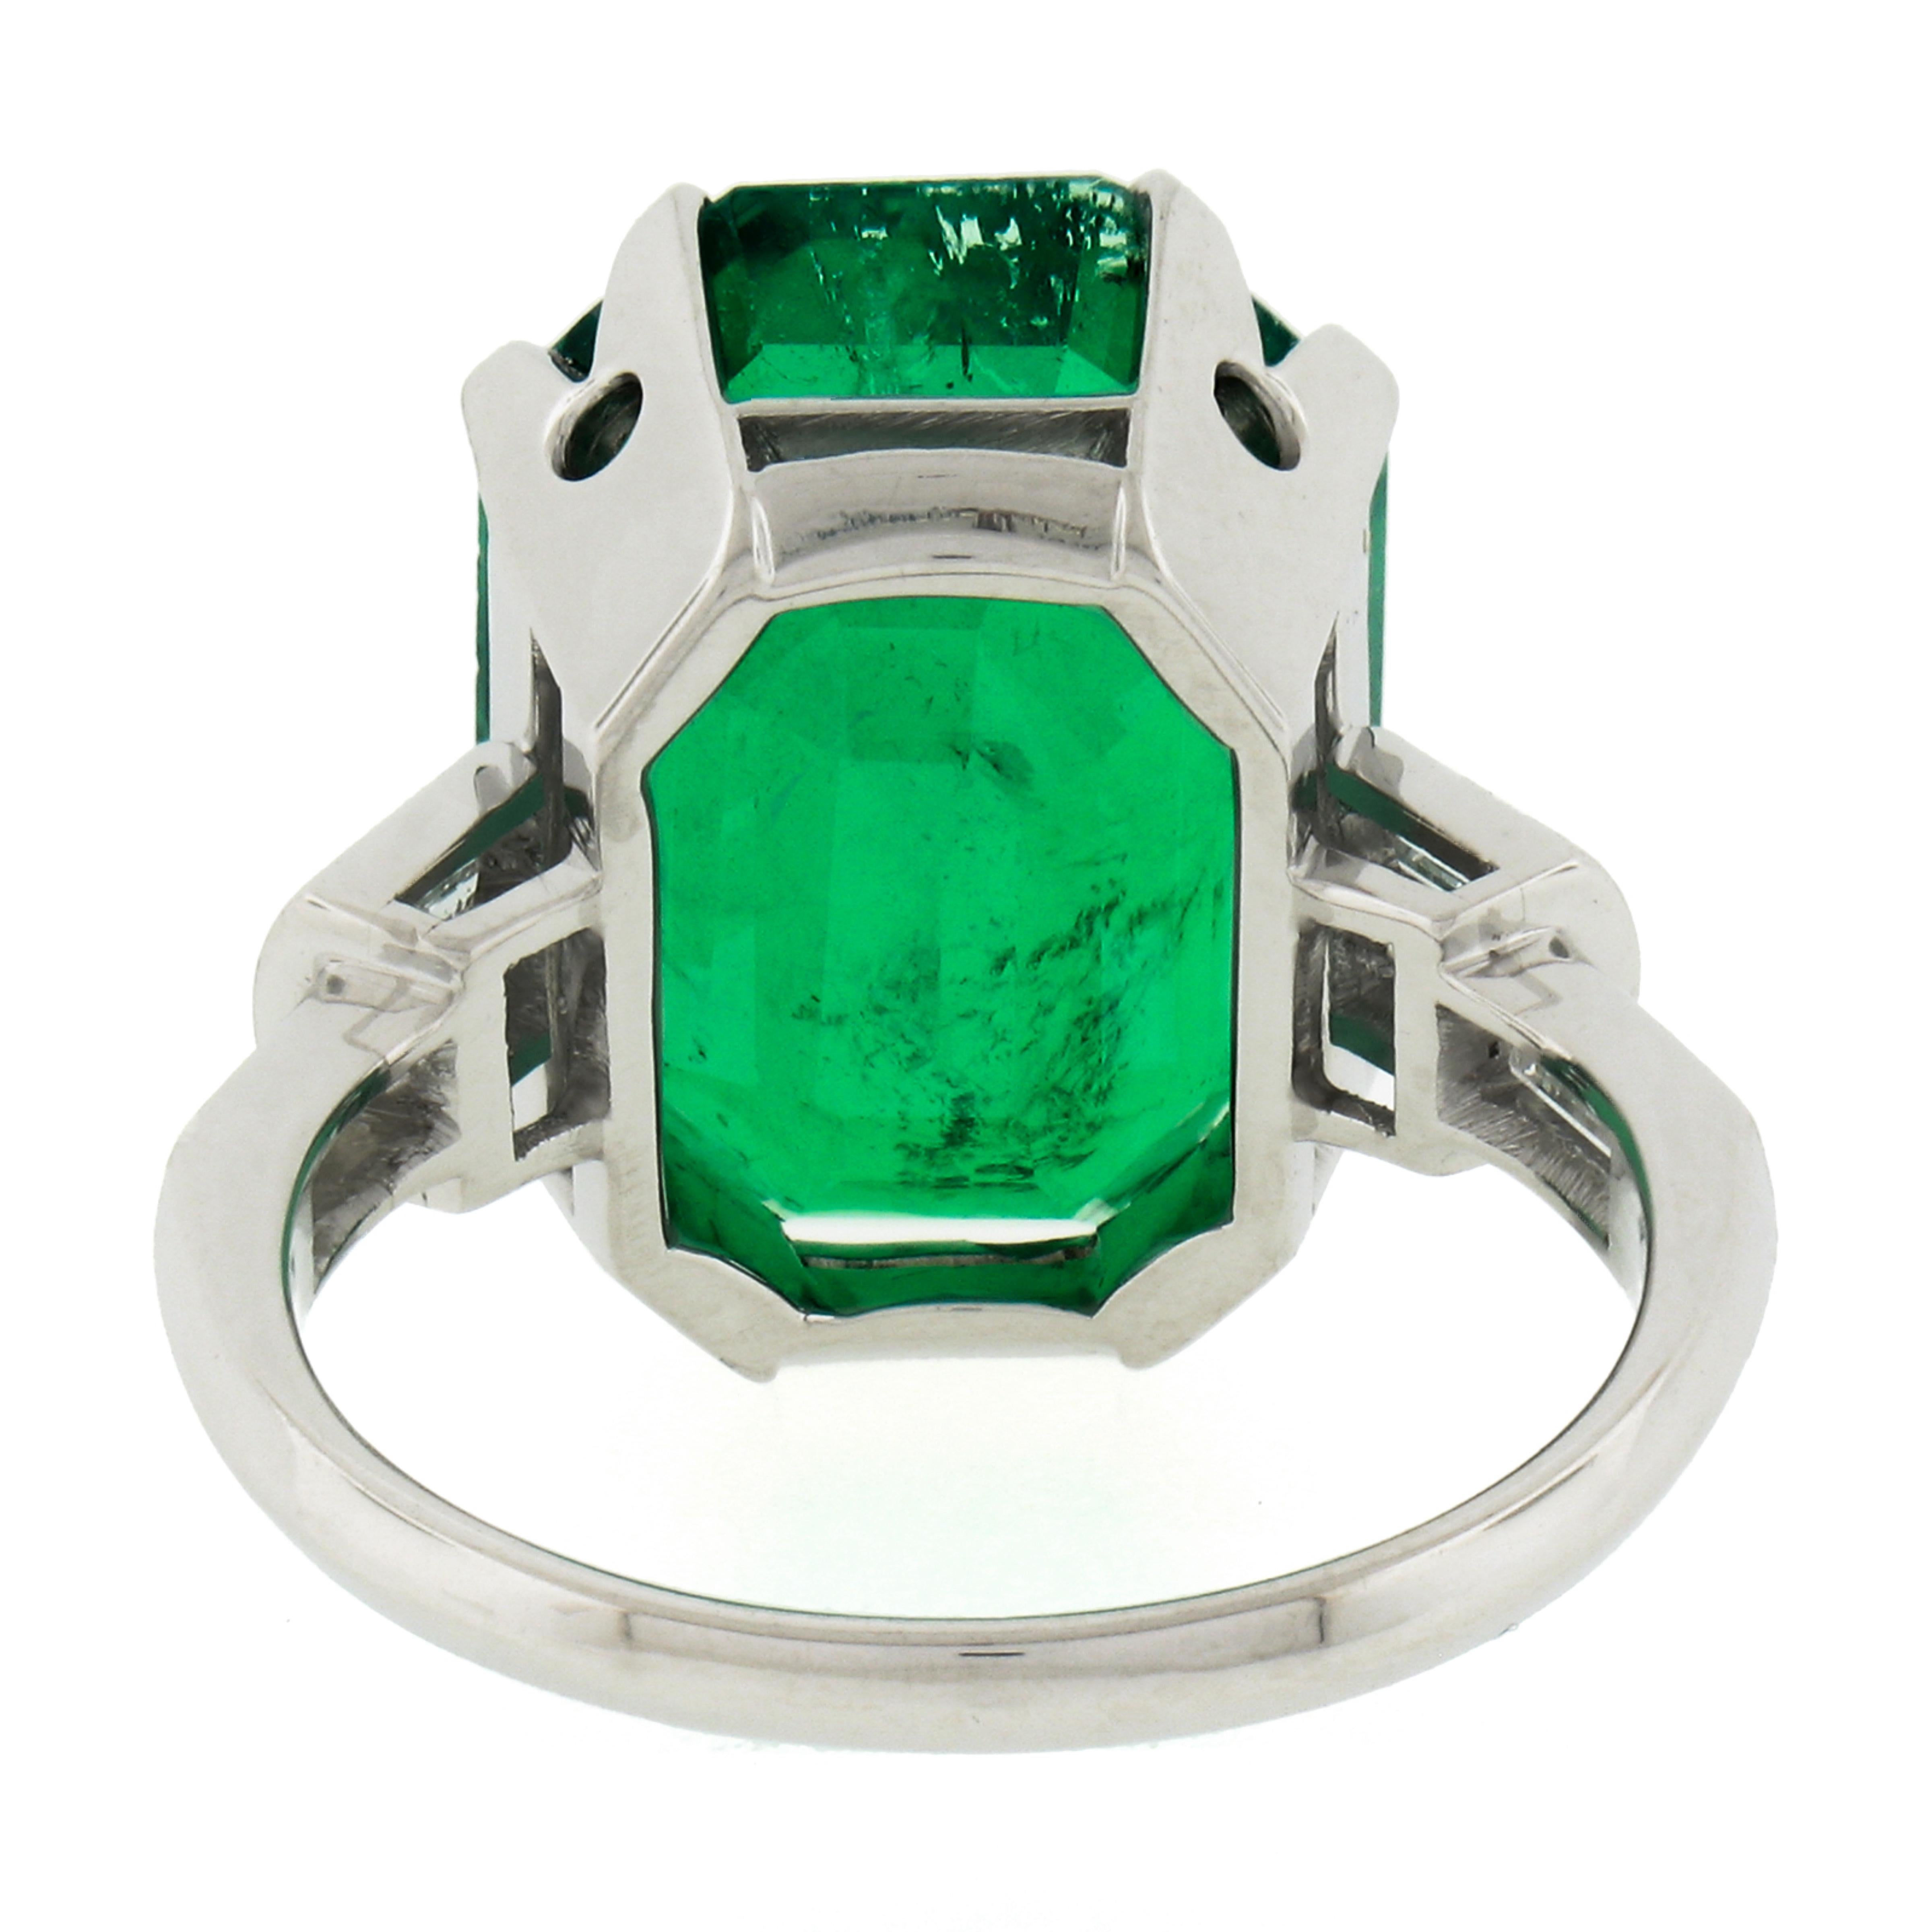 Vintage Platinum 12.16ct AGL Emerald Cut Colombian Emerald Diamond Cocktail Ring For Sale 5